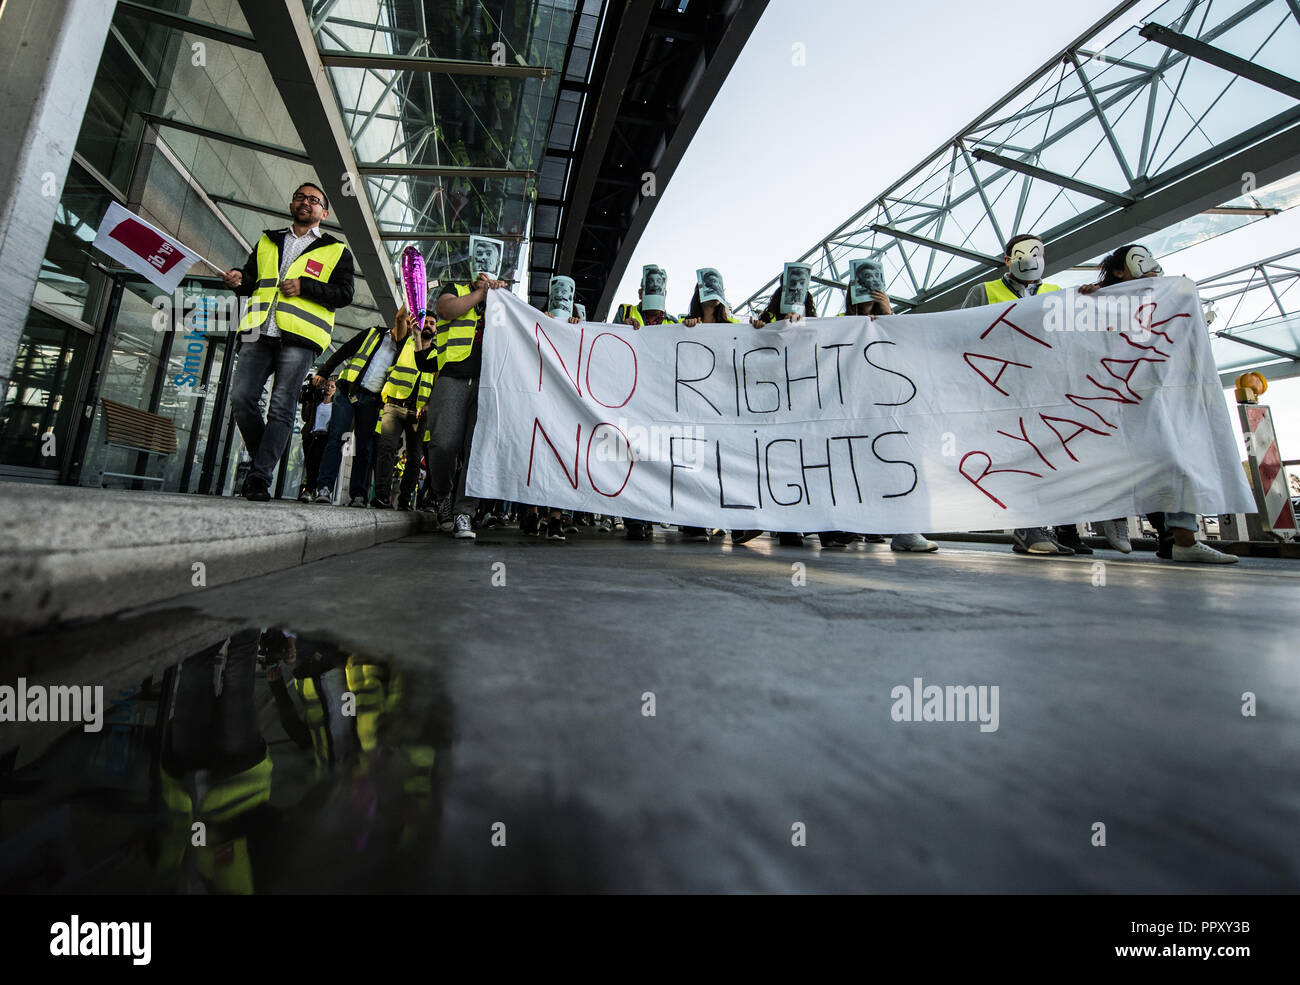 28 September 2018, Hessen, Frankfurt Main: Flight attendants of low-cost airline Ryanair demonstrate with a strike banner and masks at Terminal 2 of Frankfurt Airport. Trade unions in several European countries have called for strikes at the low-cost airline. In Germany, the pilots of the Cockpit Association (VC) and the flight attendants organized by Verdi participate. Photo: Andreas Arnold/dpa Stock Photo